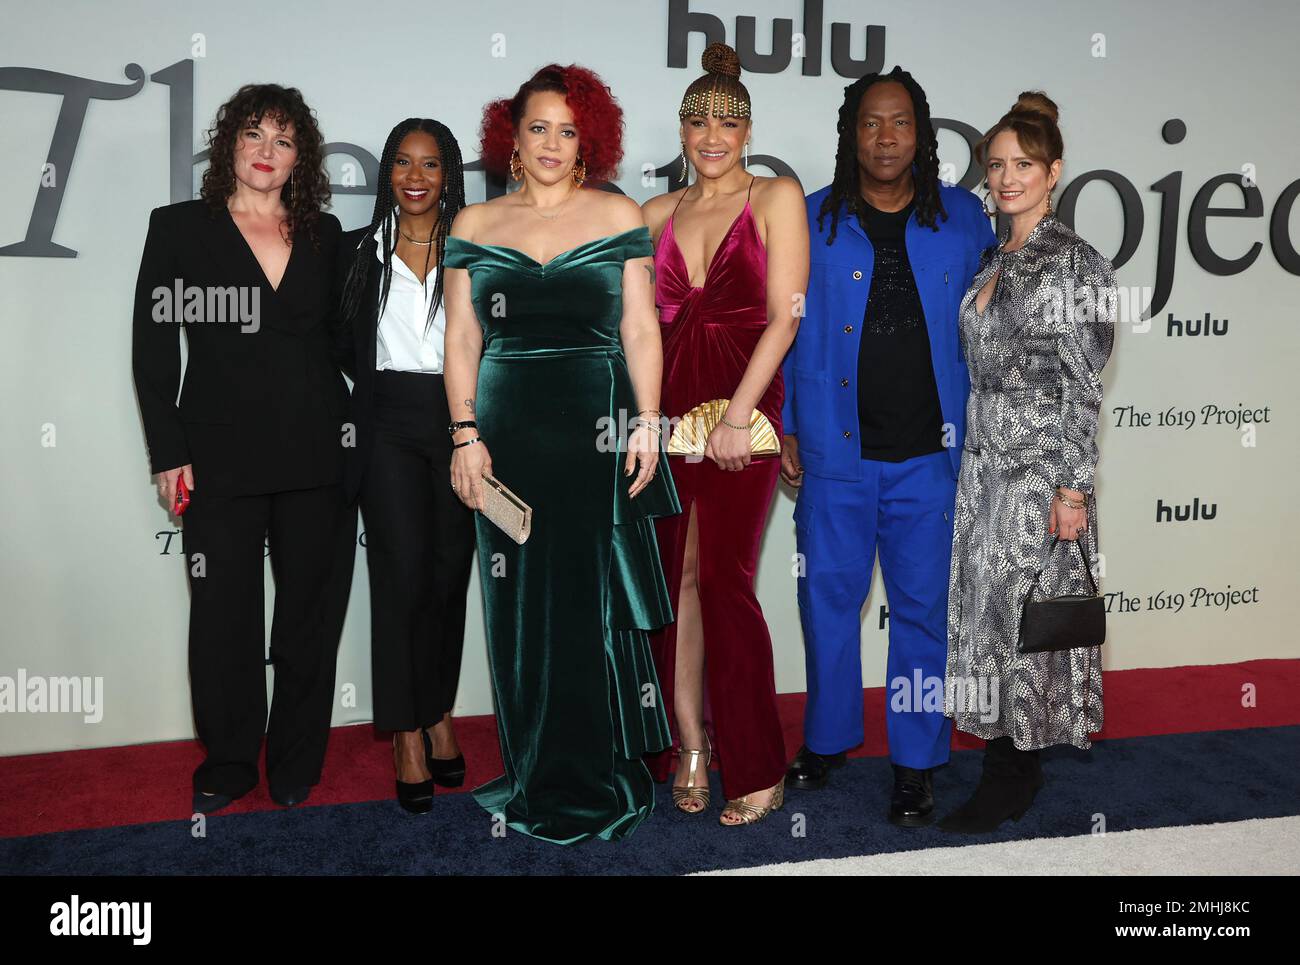 Los Angeles, USA. 26th Jan, 2023. Caitlin Roper, Tara Duncan, Nikole Hannah-Jones, Shoshana Guy, Roger Ross Williams, Kathleen Lingo at Los Angeles Red Carpet Premiere Event For Hulu's 'The 1619 Project' at Academy Museum of Motion Pictures in Los Angeles, CA, USA on January 26, 2022. Photo by Fati Sadou/ABACAPRESS.COM Credit: Abaca Press/Alamy Live News Stock Photo